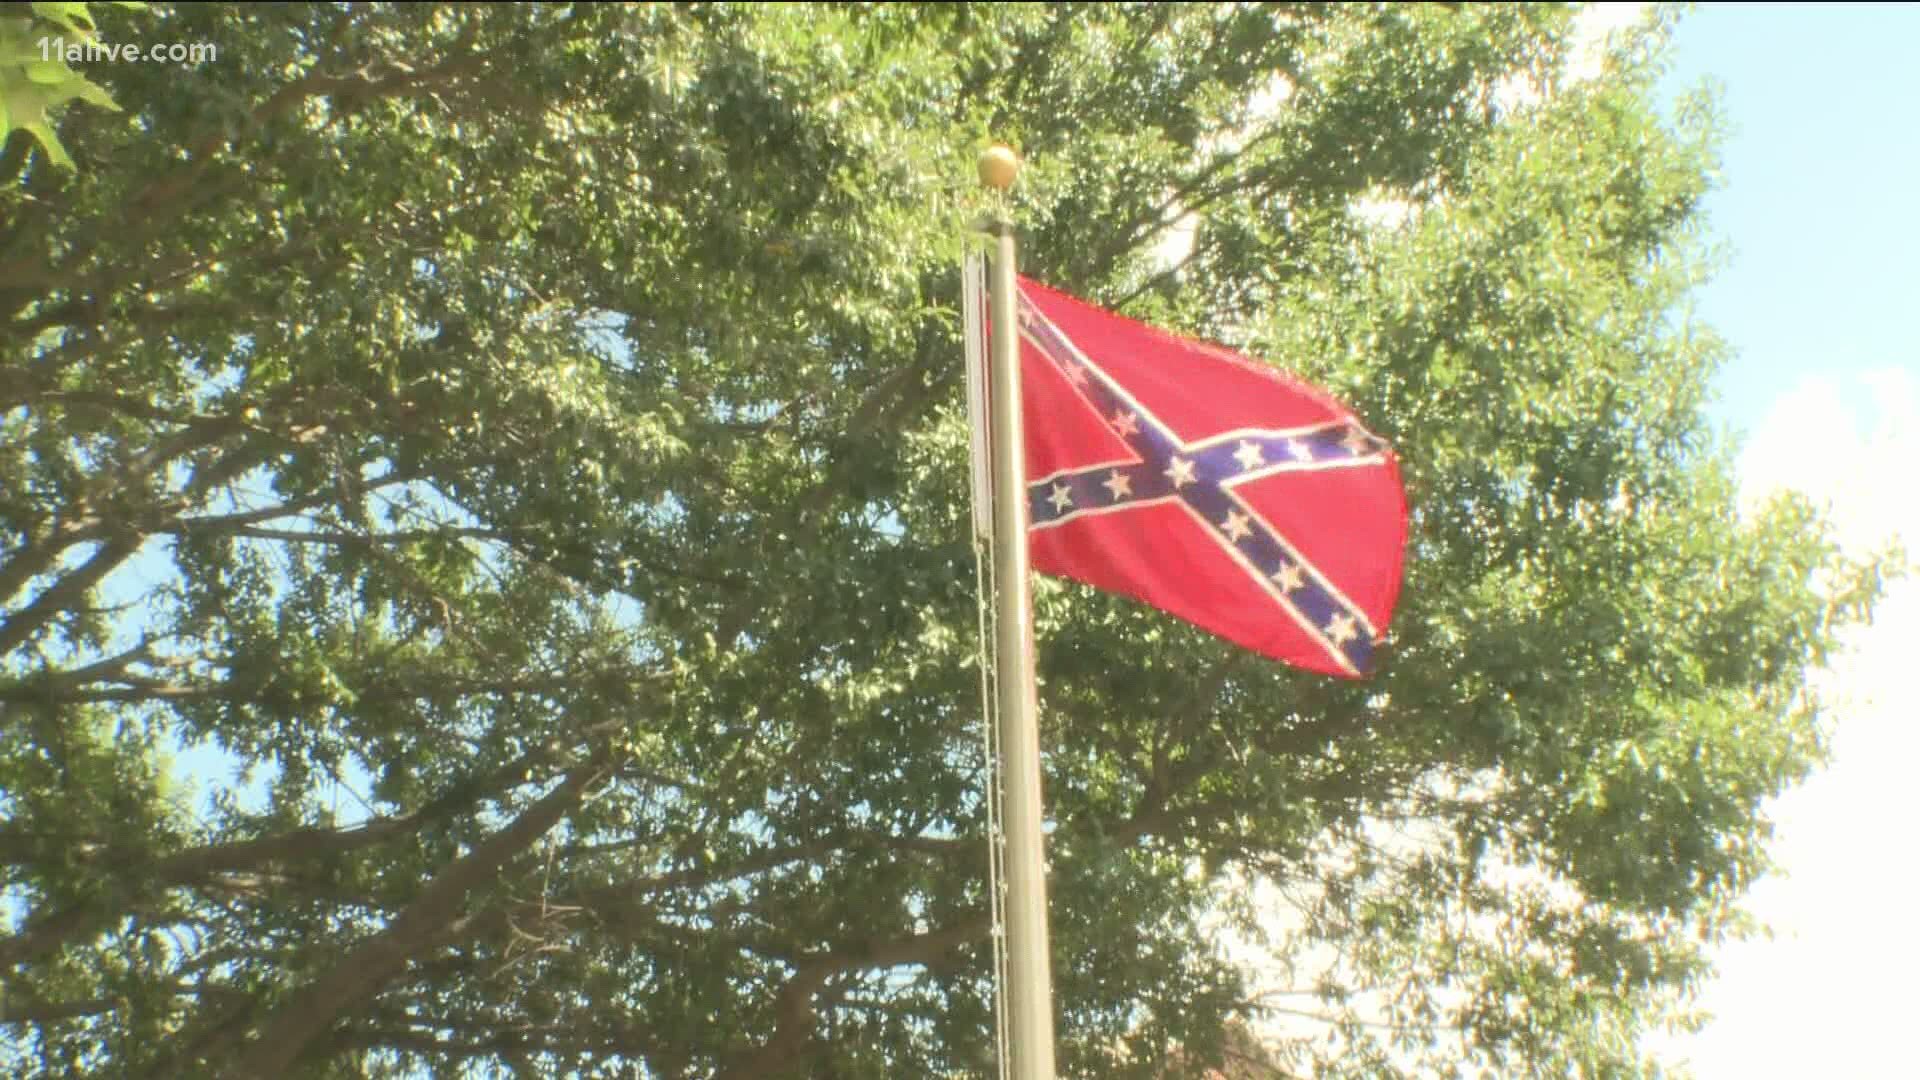 The council voted unanimously to remove the flag from its war memorial during a packed meeting.